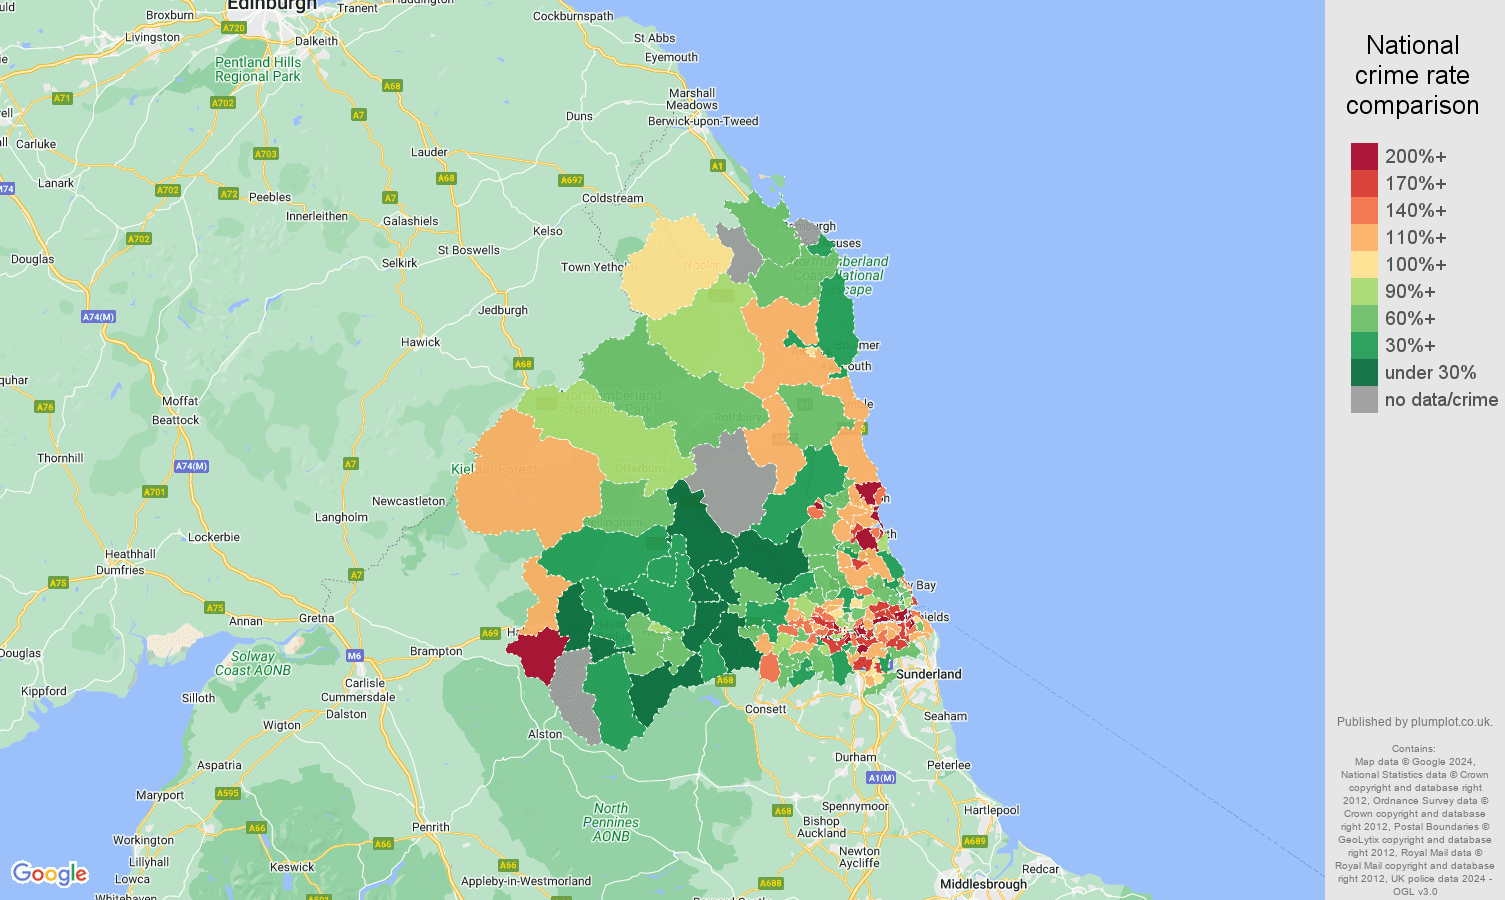 Newcastle upon Tyne public order crime rate comparison map